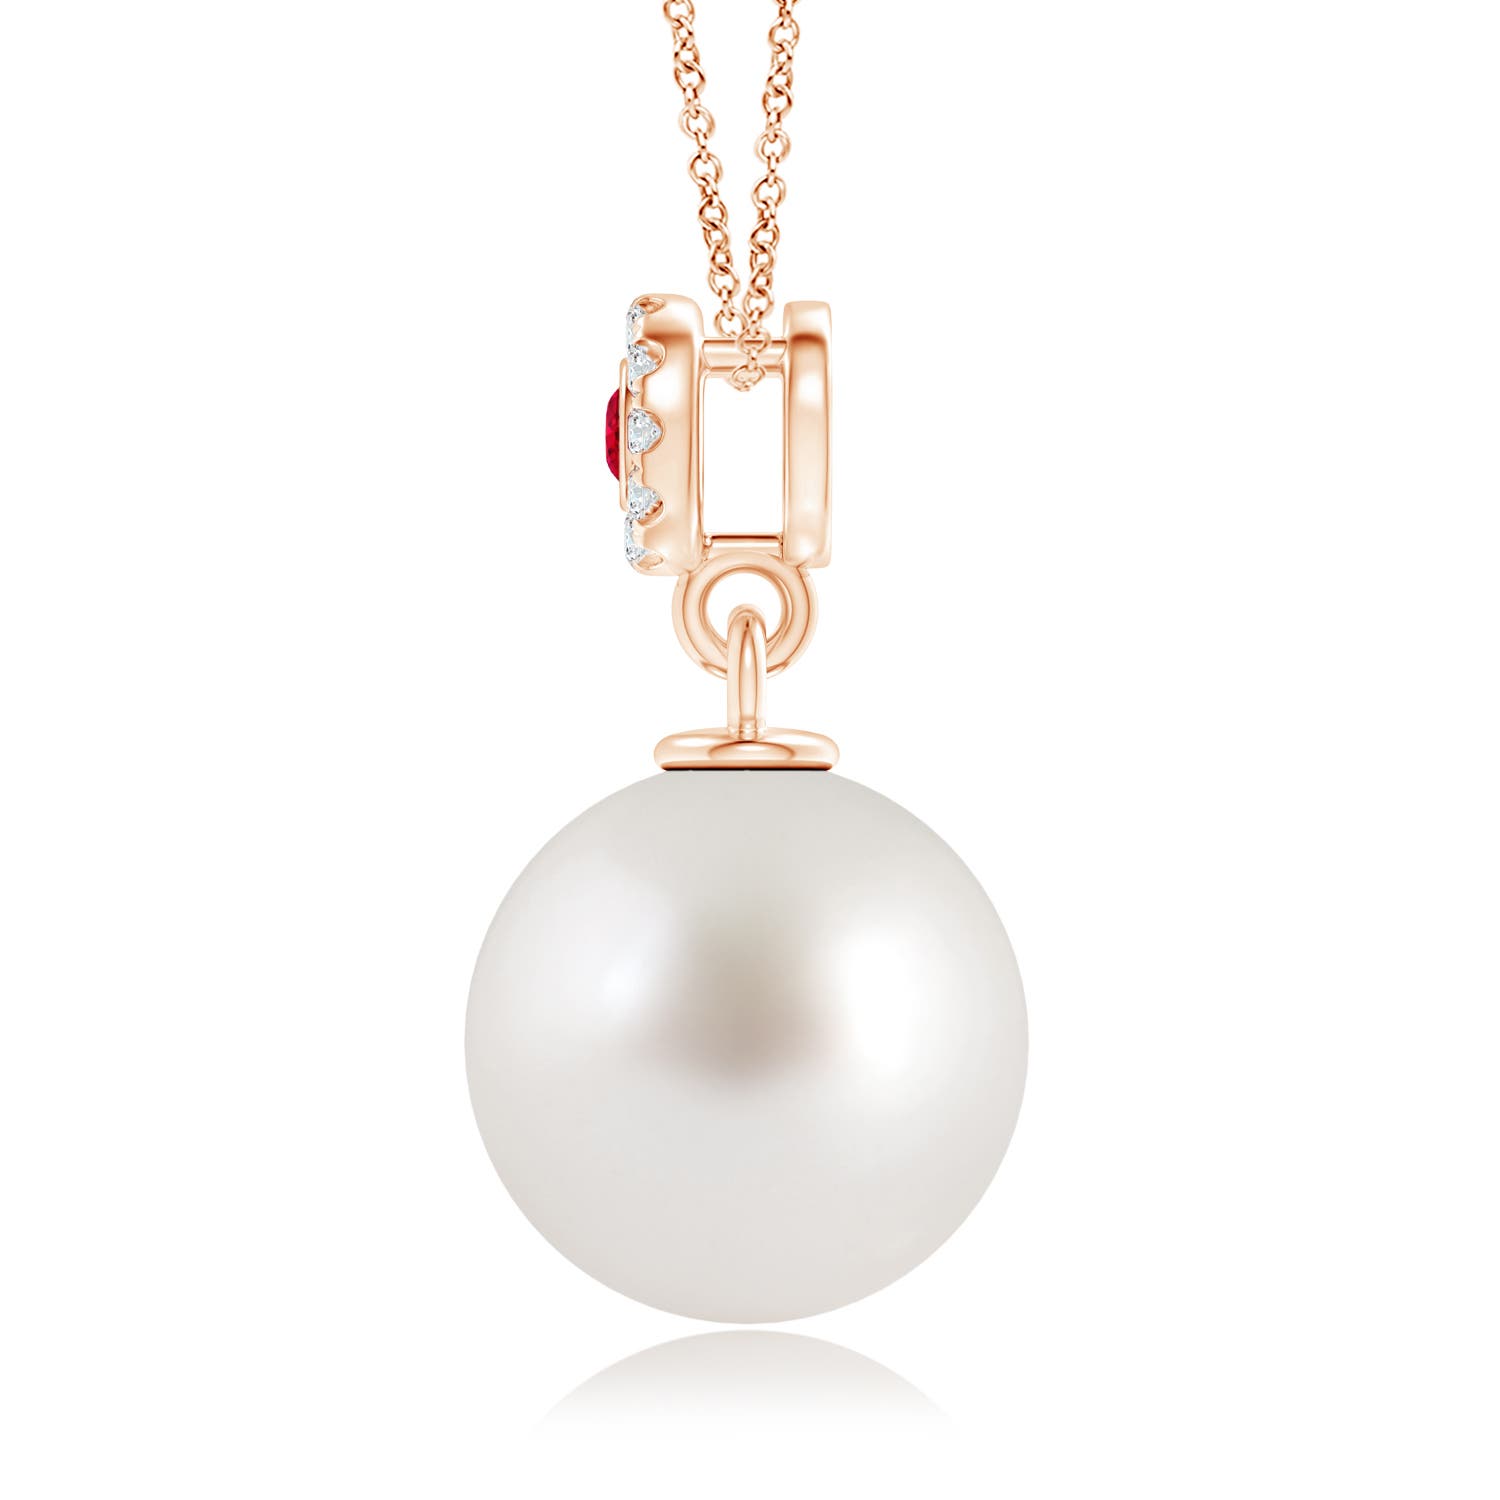 AAA - South Sea Cultured Pearl / 7.31 CT / 14 KT Rose Gold